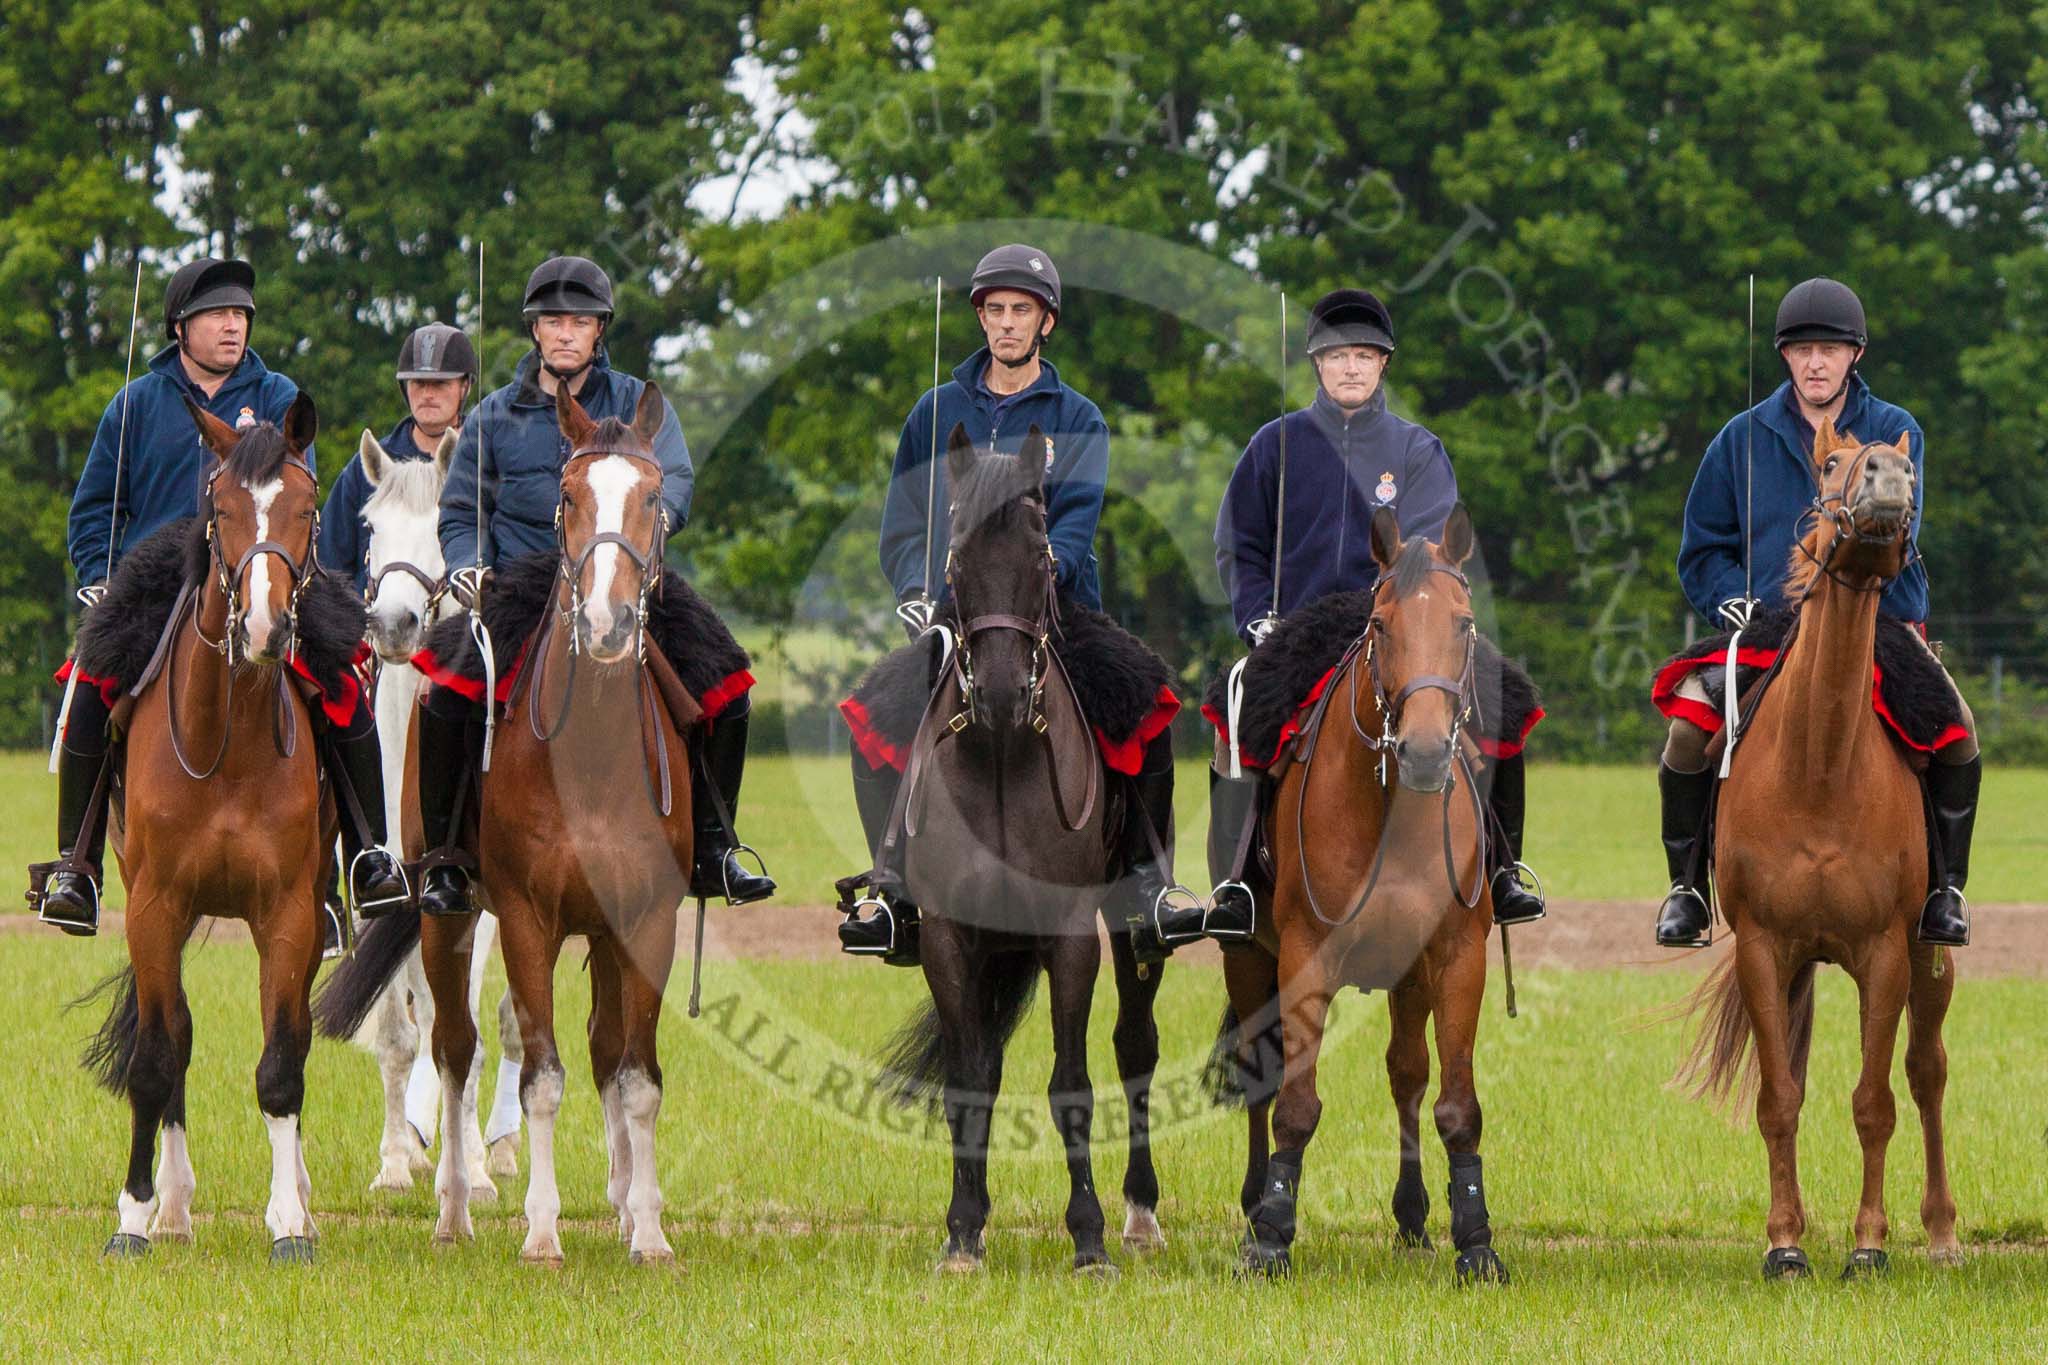 The Light Cavalry HAC Annual Review and Inspection 2013.
Windsor Great Park Review Ground,
Windsor,
Berkshire,
United Kingdom,
on 09 June 2013 at 10:56, image #116